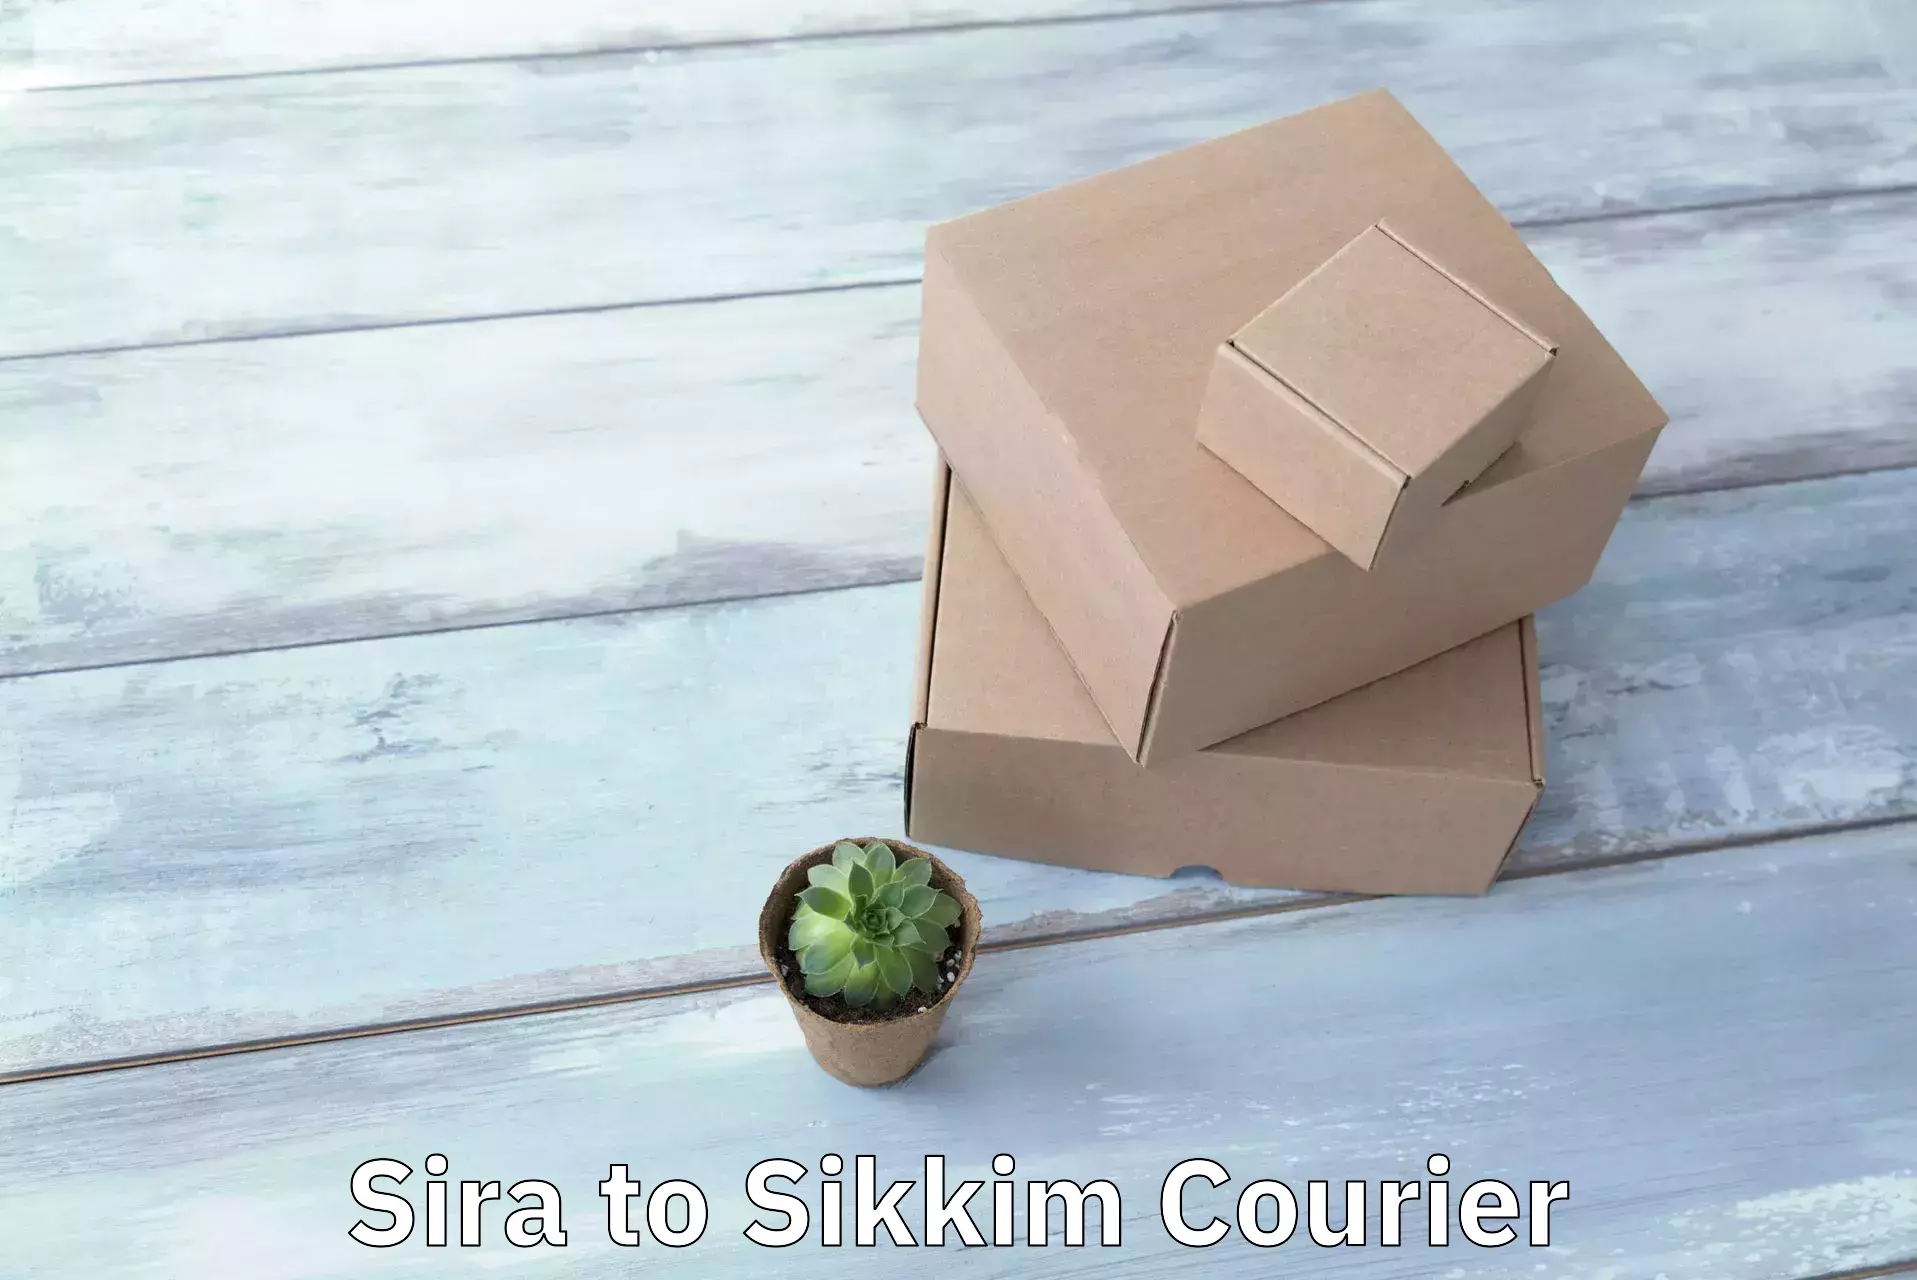 Courier service comparison Sira to Geyzing